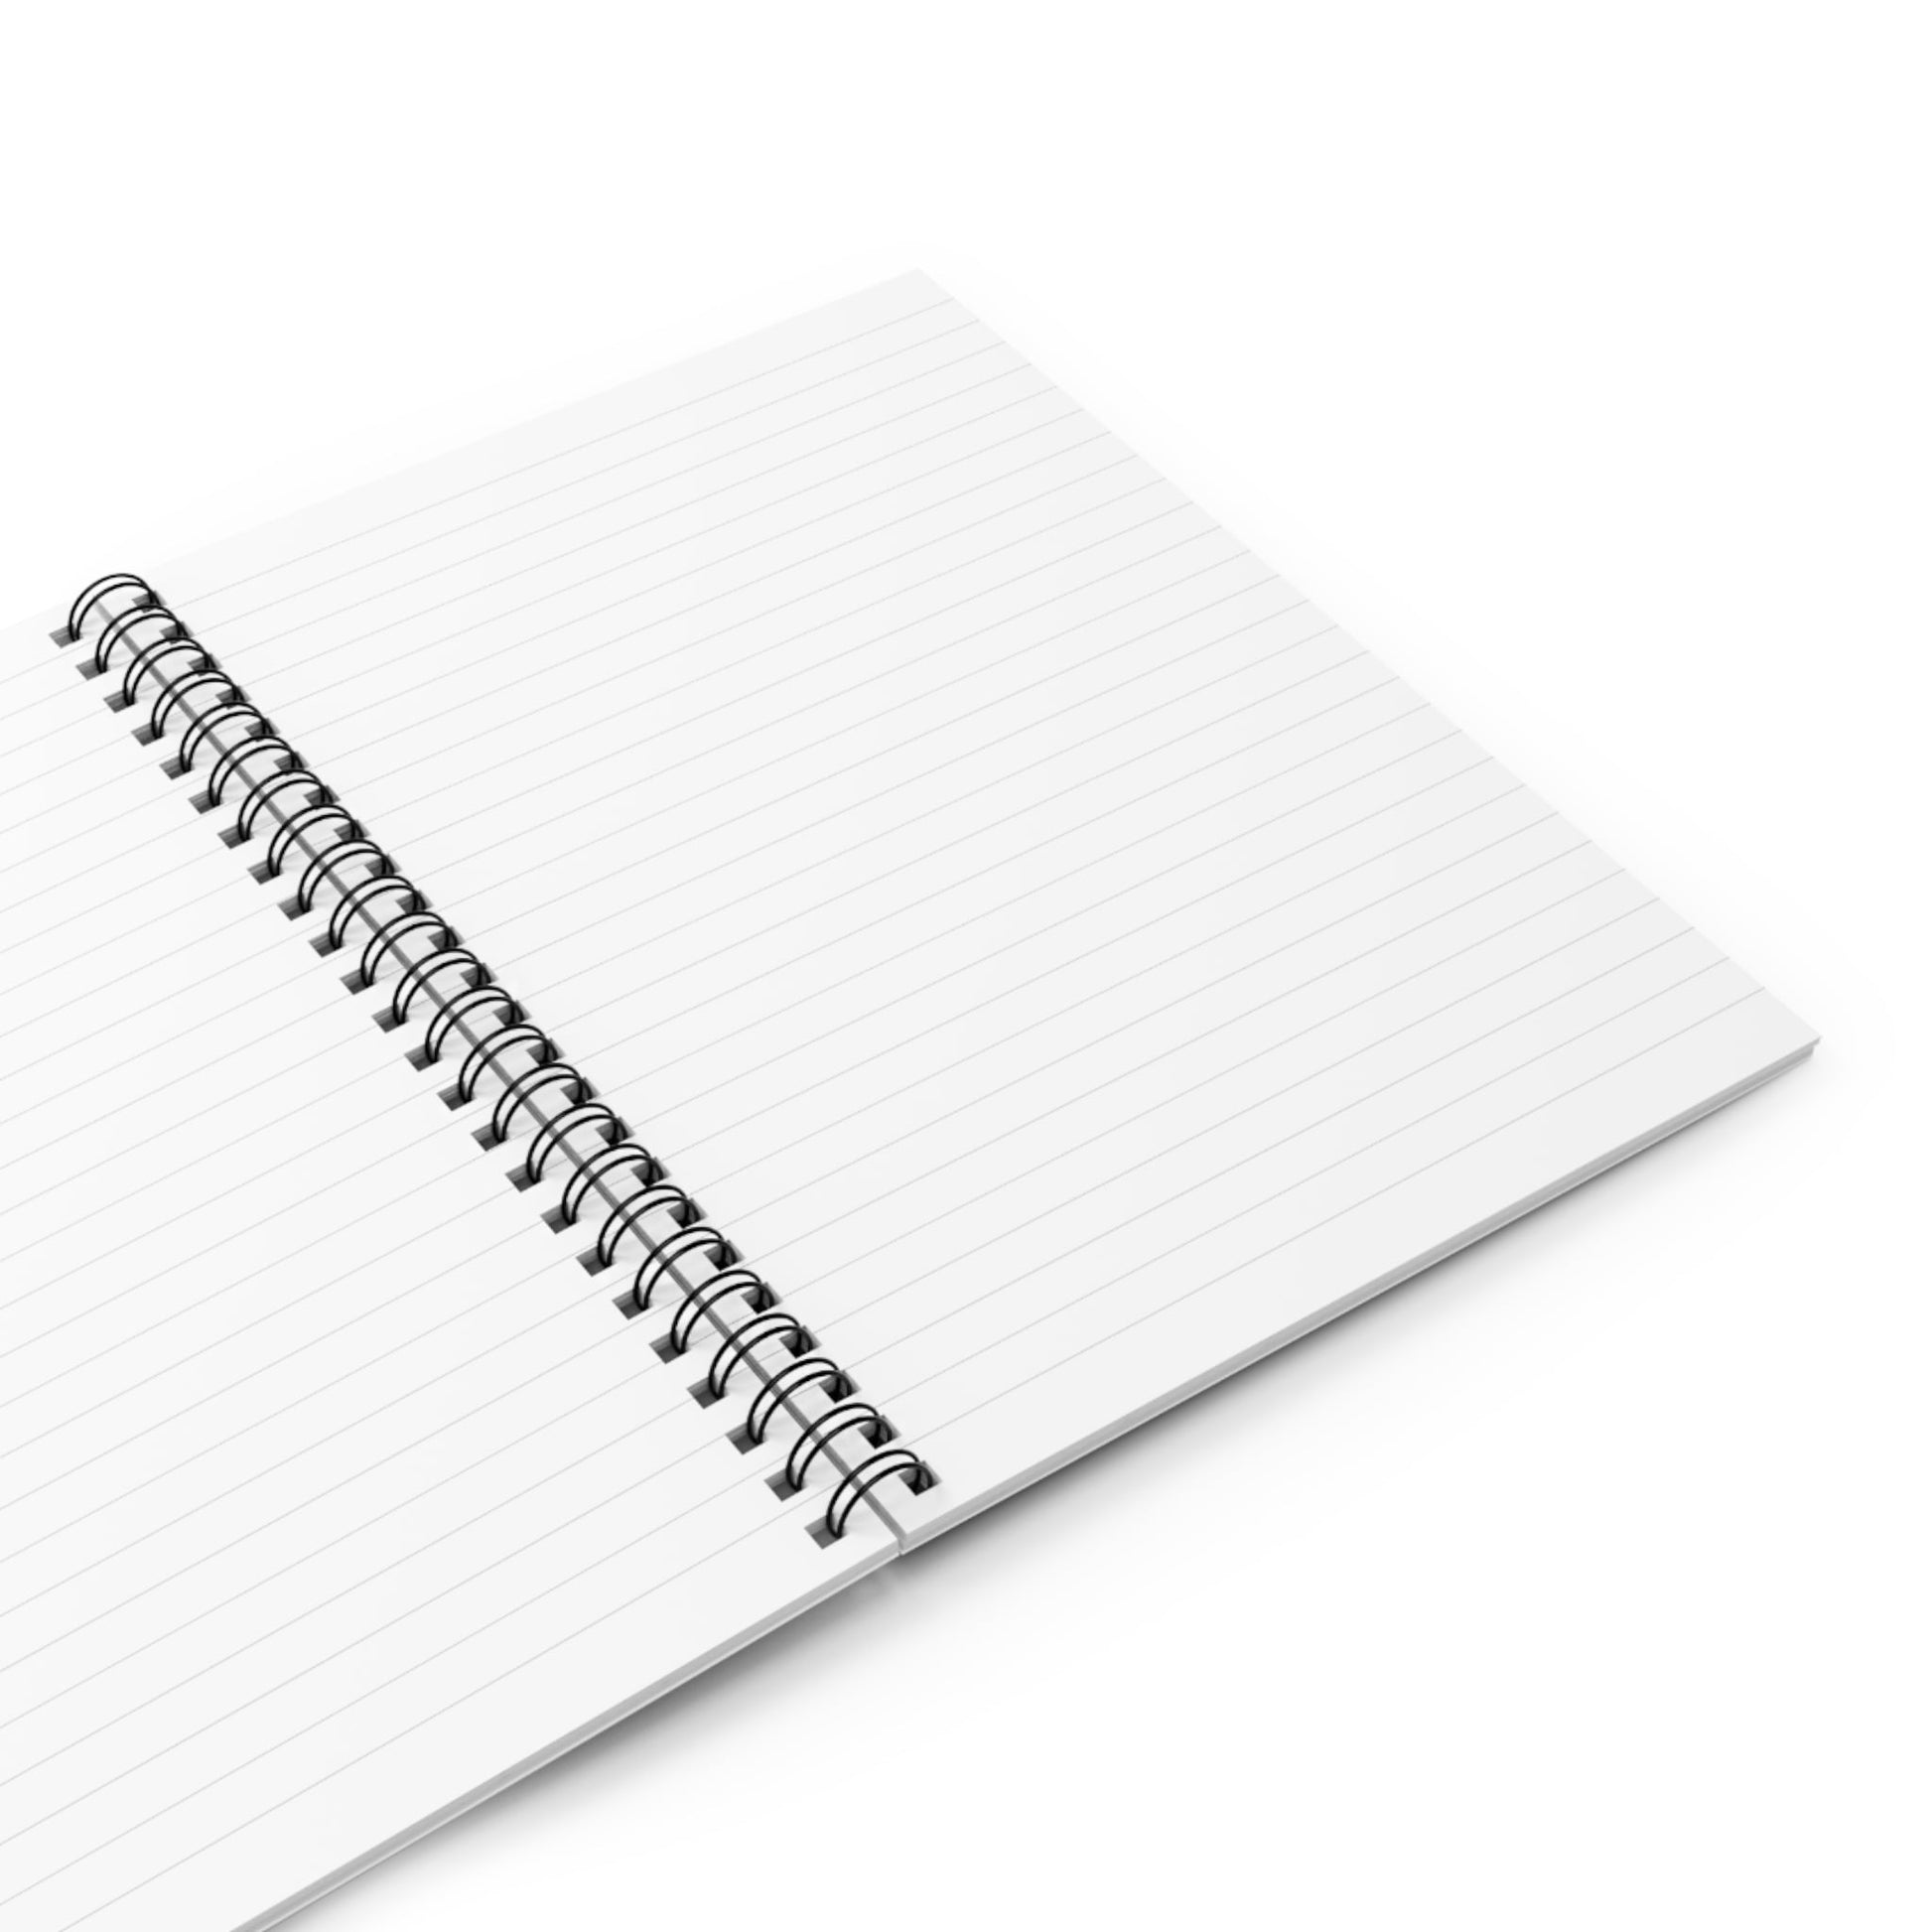 Spiral Notebook with Light Blue Minimalist Cover Opened with Blank White College Ruled Pages